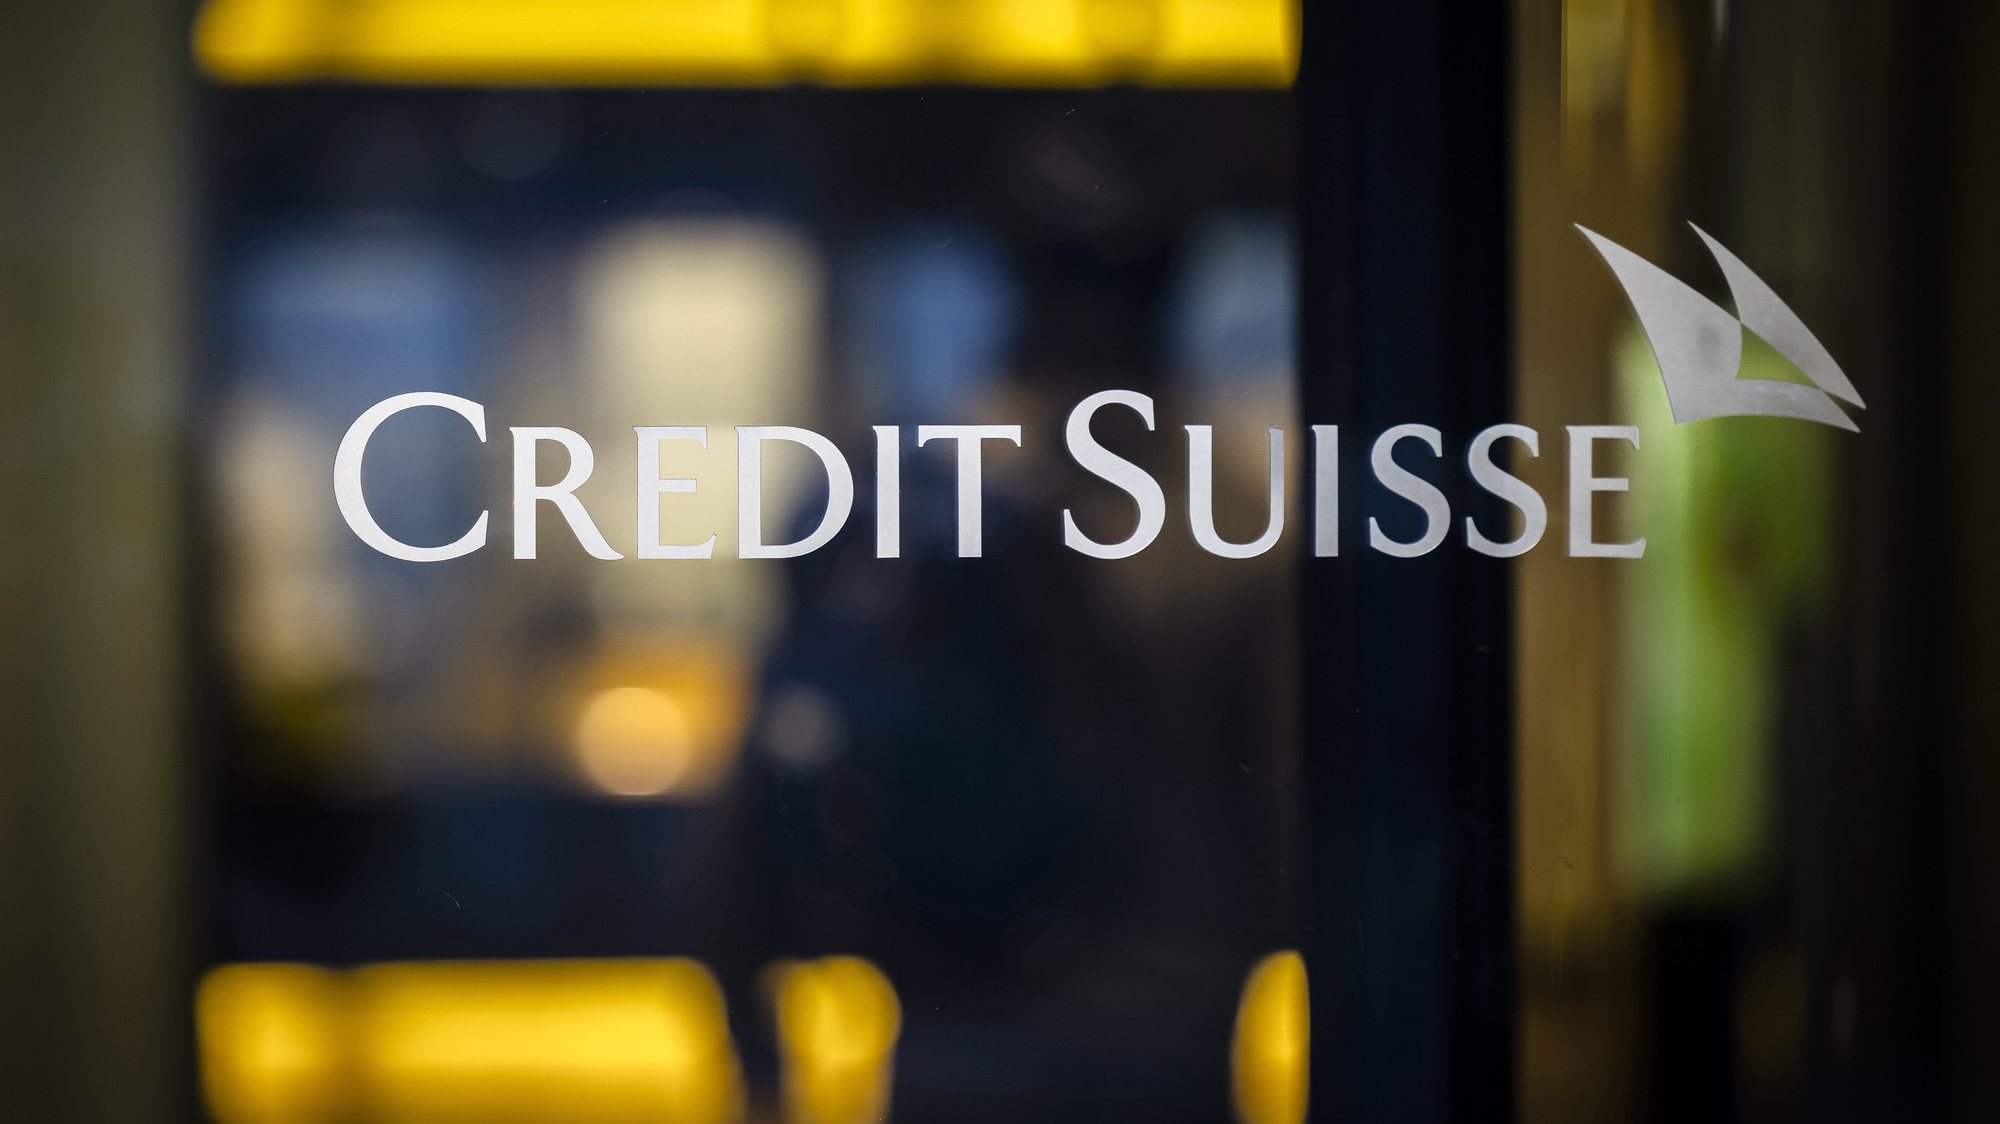 epa10268765 The logo of Swiss bank Credit Suisse at a building in Zurich, Switzerland, 27 October 2022. Credit Suisse on 27 october announced a restructuring plan that includes shrinking its investment bank and raising four billion Swiss francs.  EPA/MICHAEL BUHOLZER